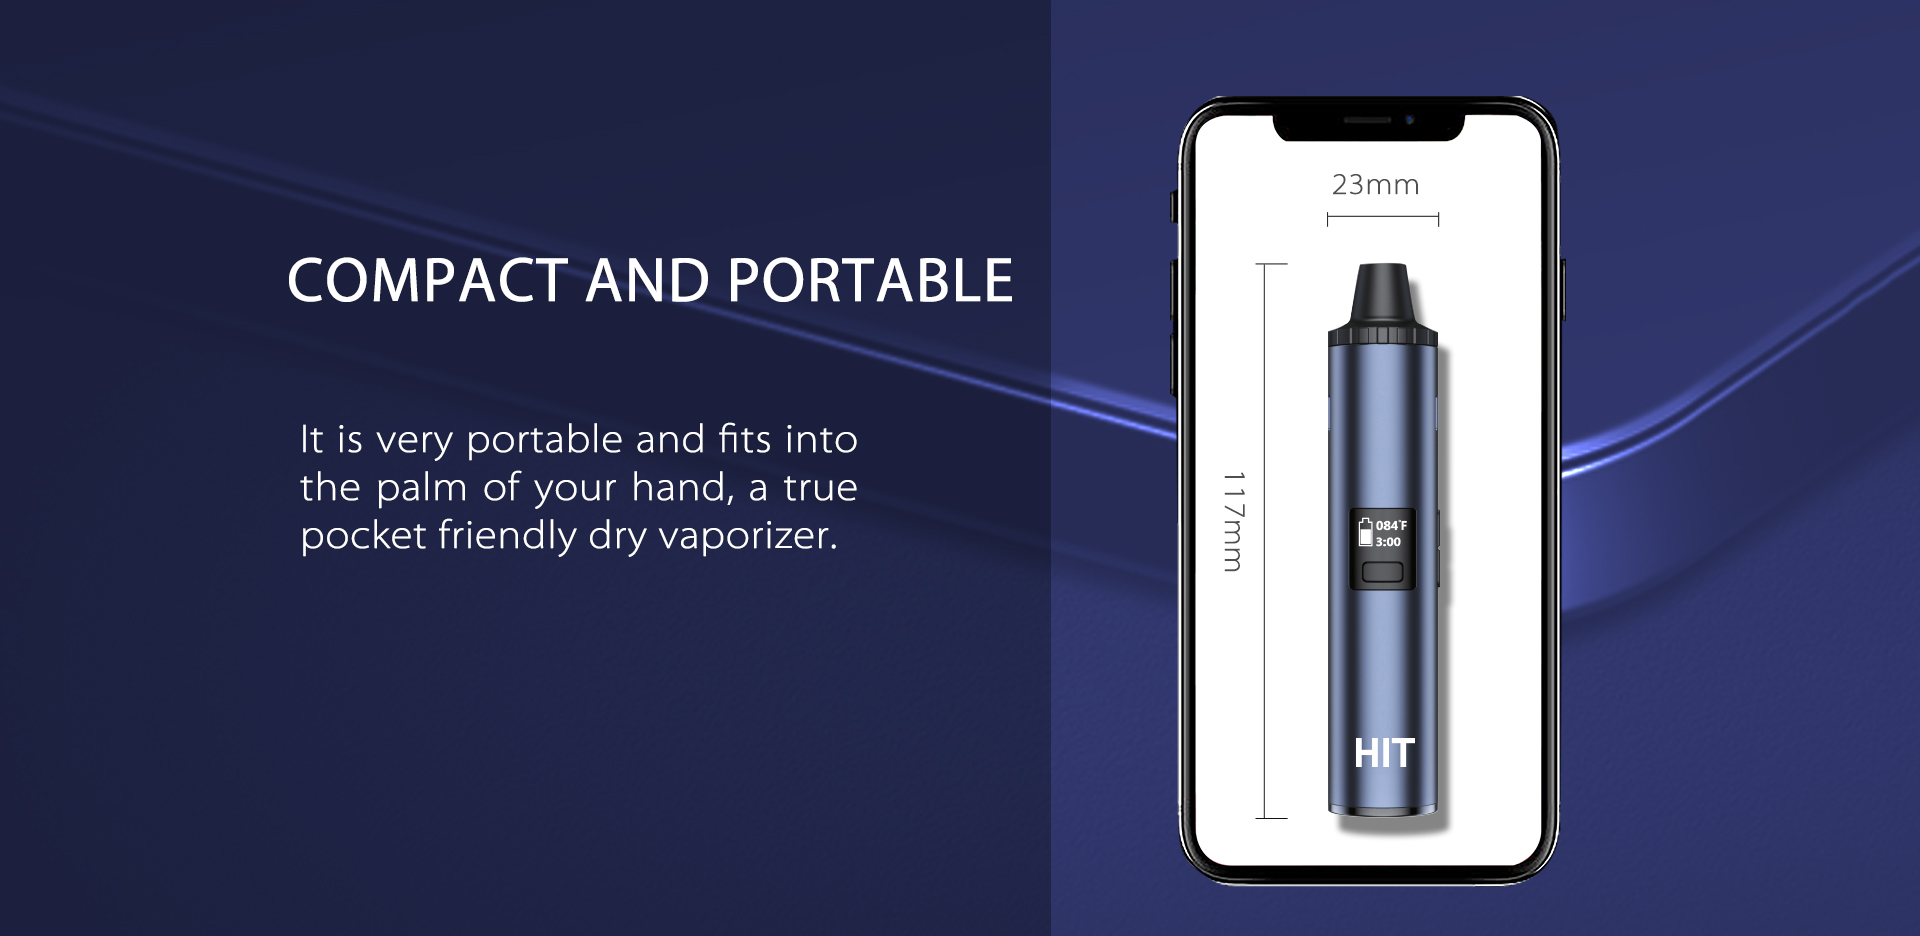 Yocan Hit Vaporizer Pen is very compact and on-the-go.